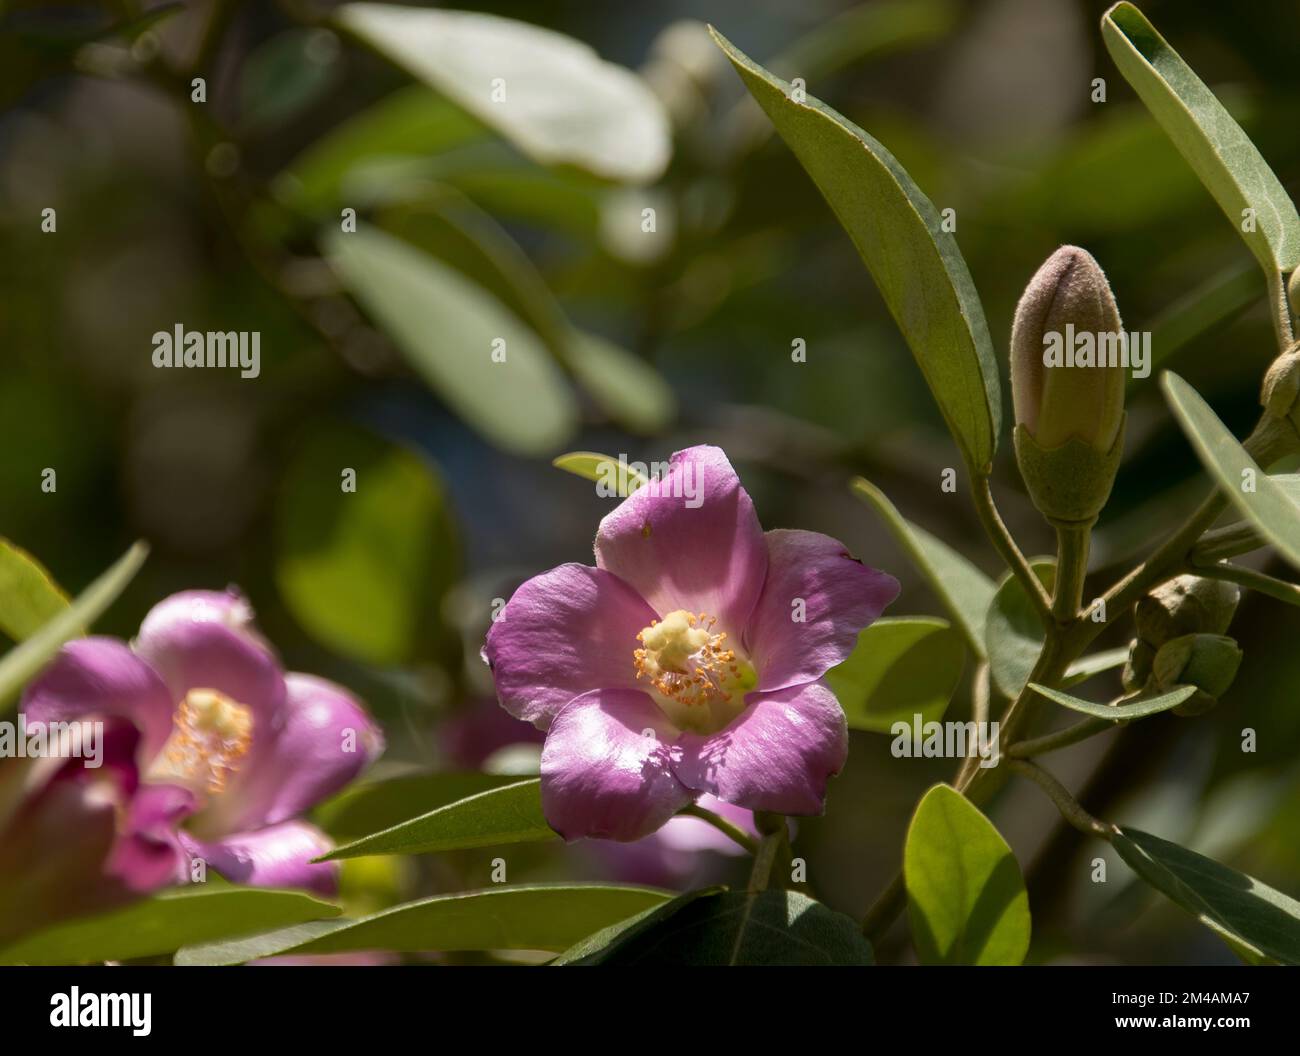 Pink blossom of Norfolk Island Hibiscus tree, Lagunaria patersonia, in Queensland, Australia. Shiny petals with yellow pistil. Green leafy background. Stock Photo